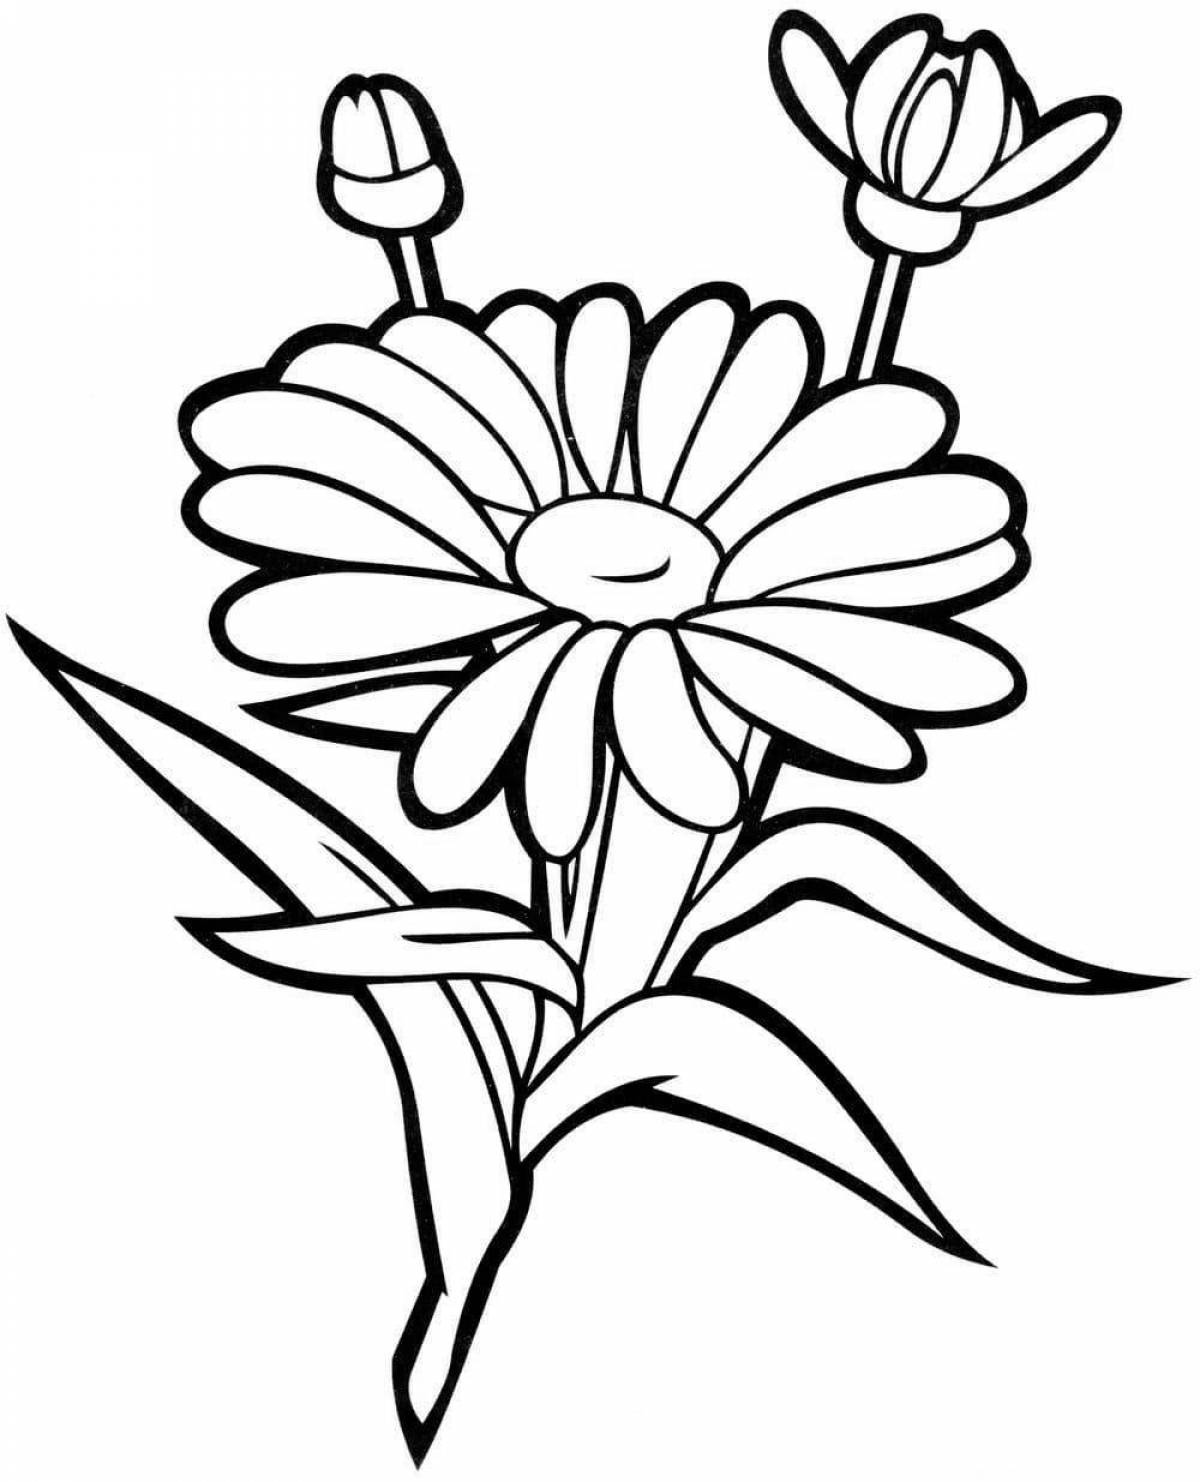 Exciting coloring flower picture for kids